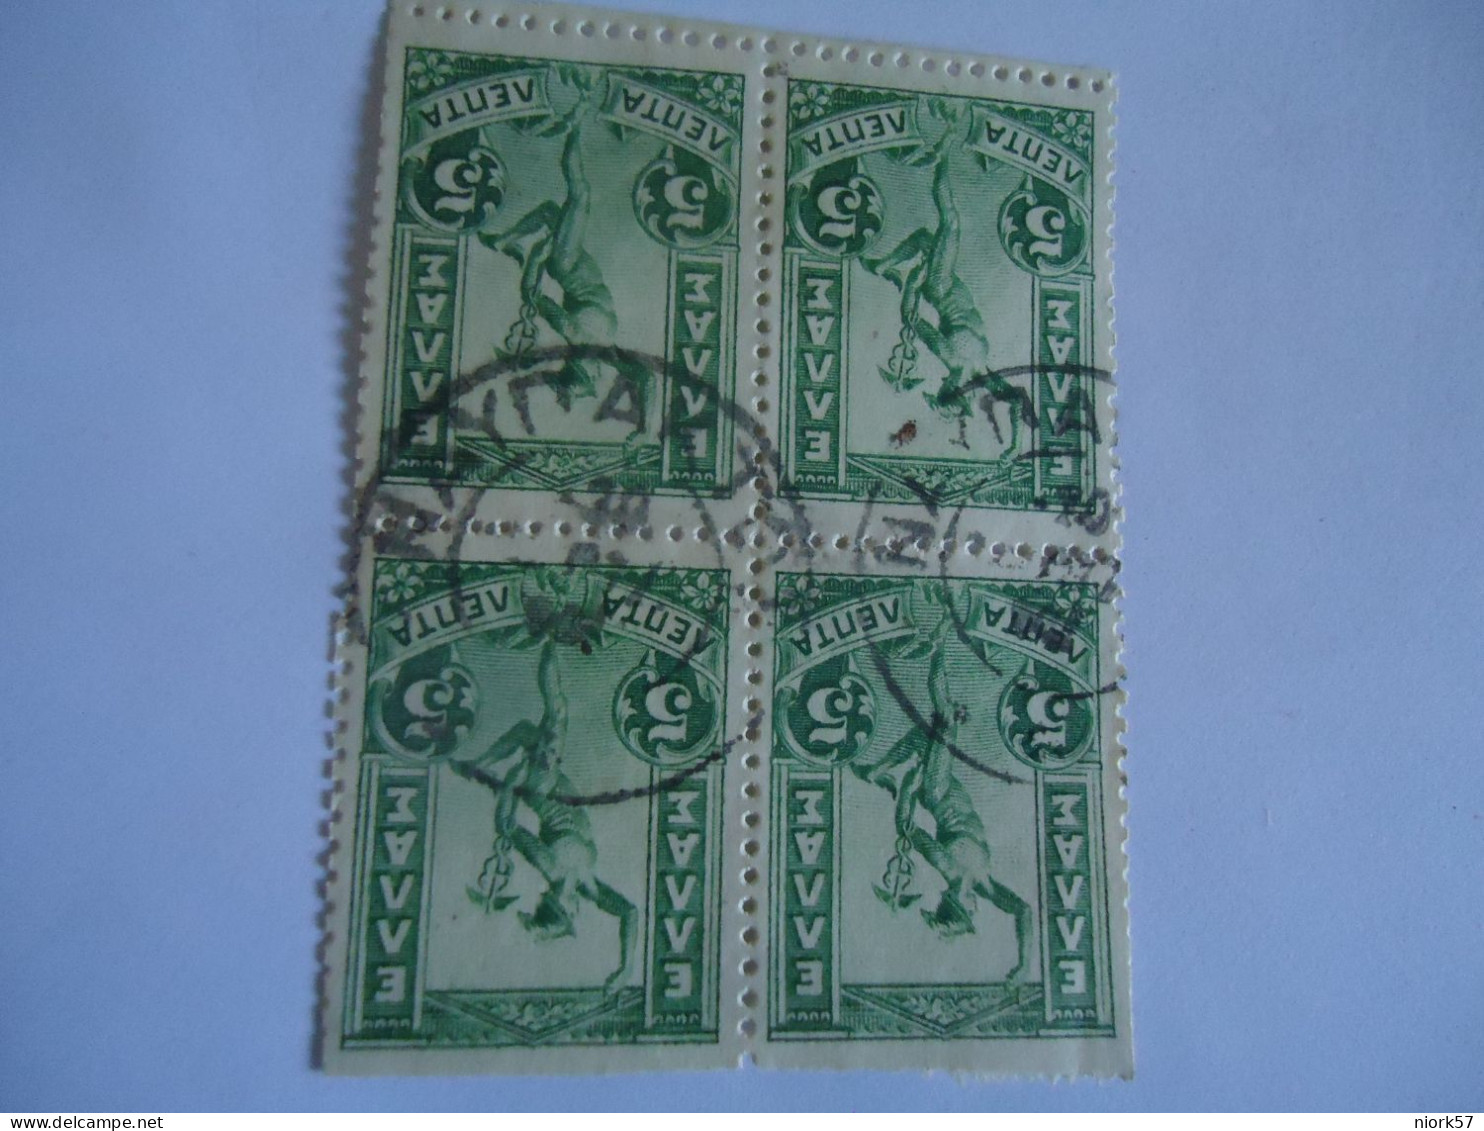 GREECE USED STAMPS BLOCK OF 4 1901 FLYING    POSTMARK  ΝΑΥΠΑΚΤΟΣ - Used Stamps